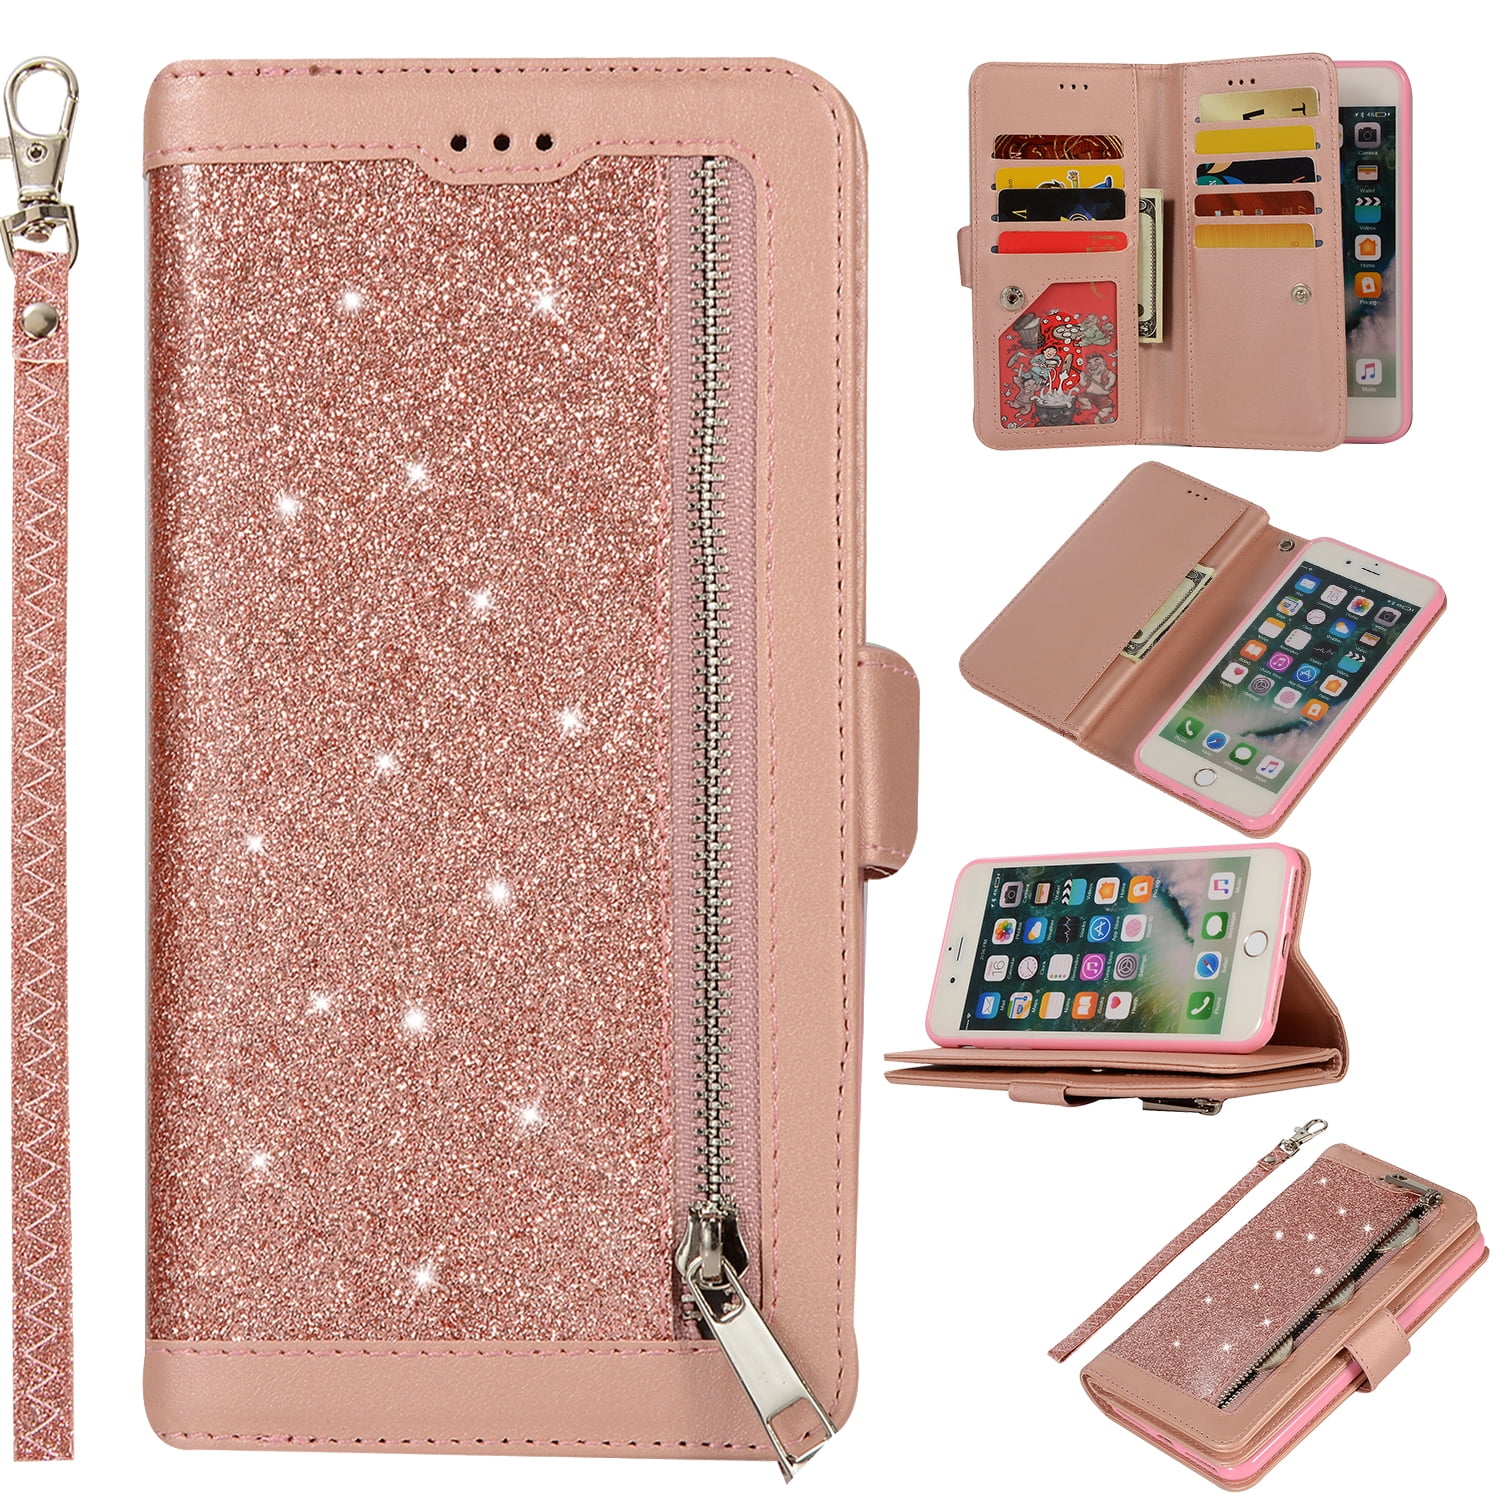 Zipper Wallet Case for iPhone 8 Plus iPhone 7 Plus 5.5-inch, Allytech Bling Glitter Leather Case with 9 Credit Card Holder Flip Magnetic Closure Stand Cover with Pocket and Hand Strap,